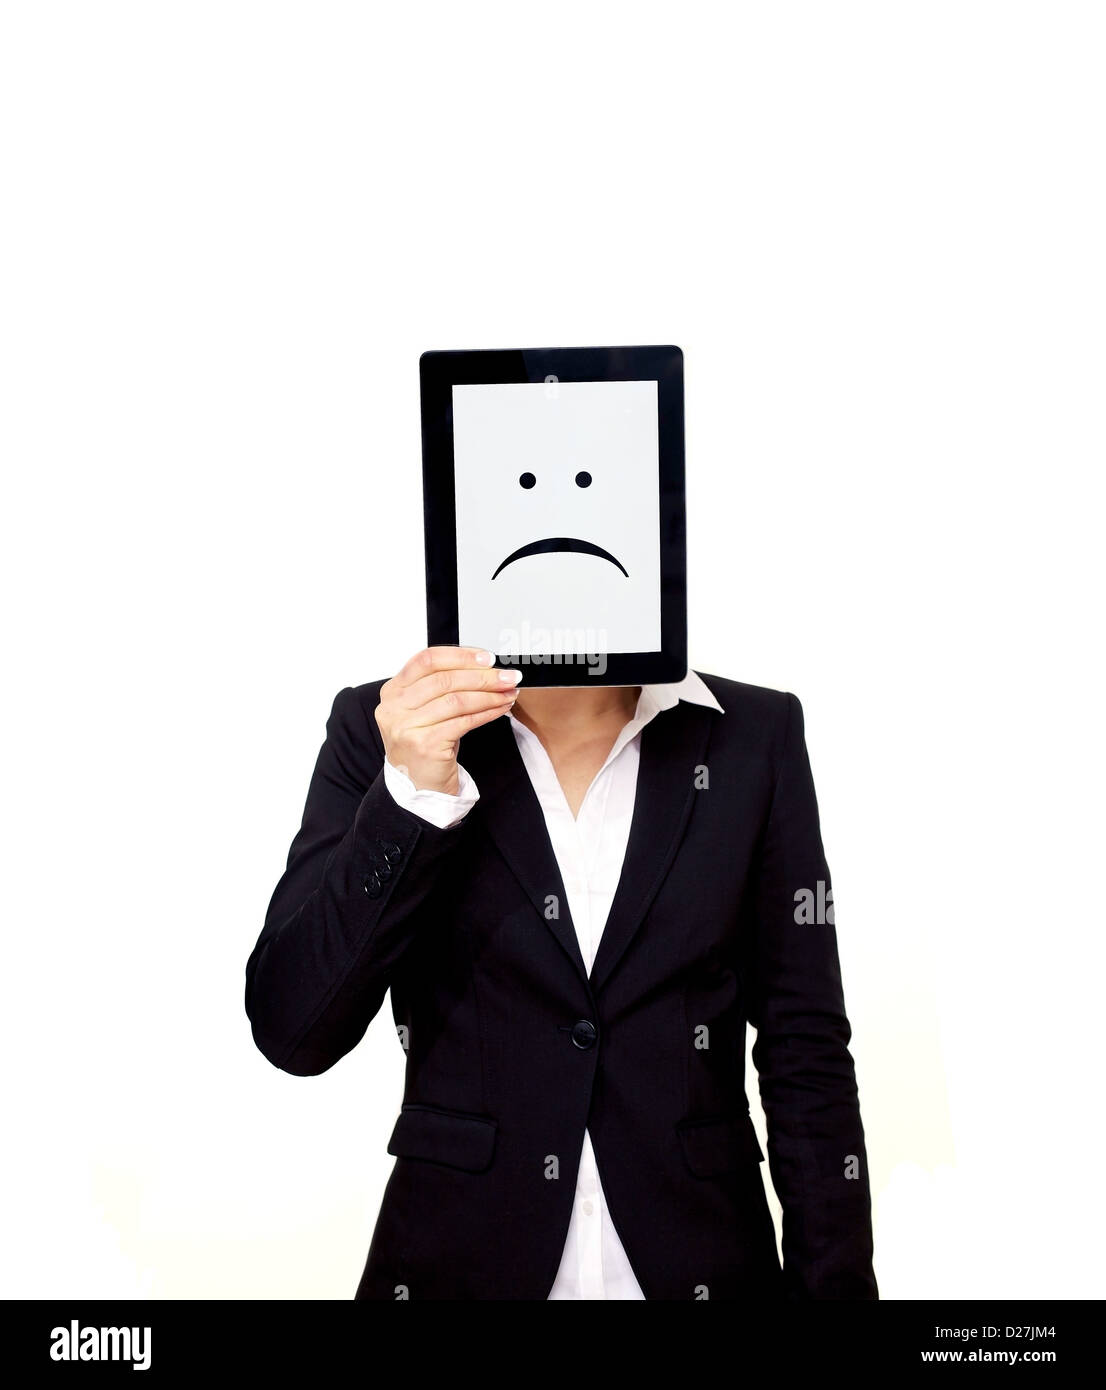 Frustrated professional holding up a digital tablet with a sad emoticon on screen Stock Photo